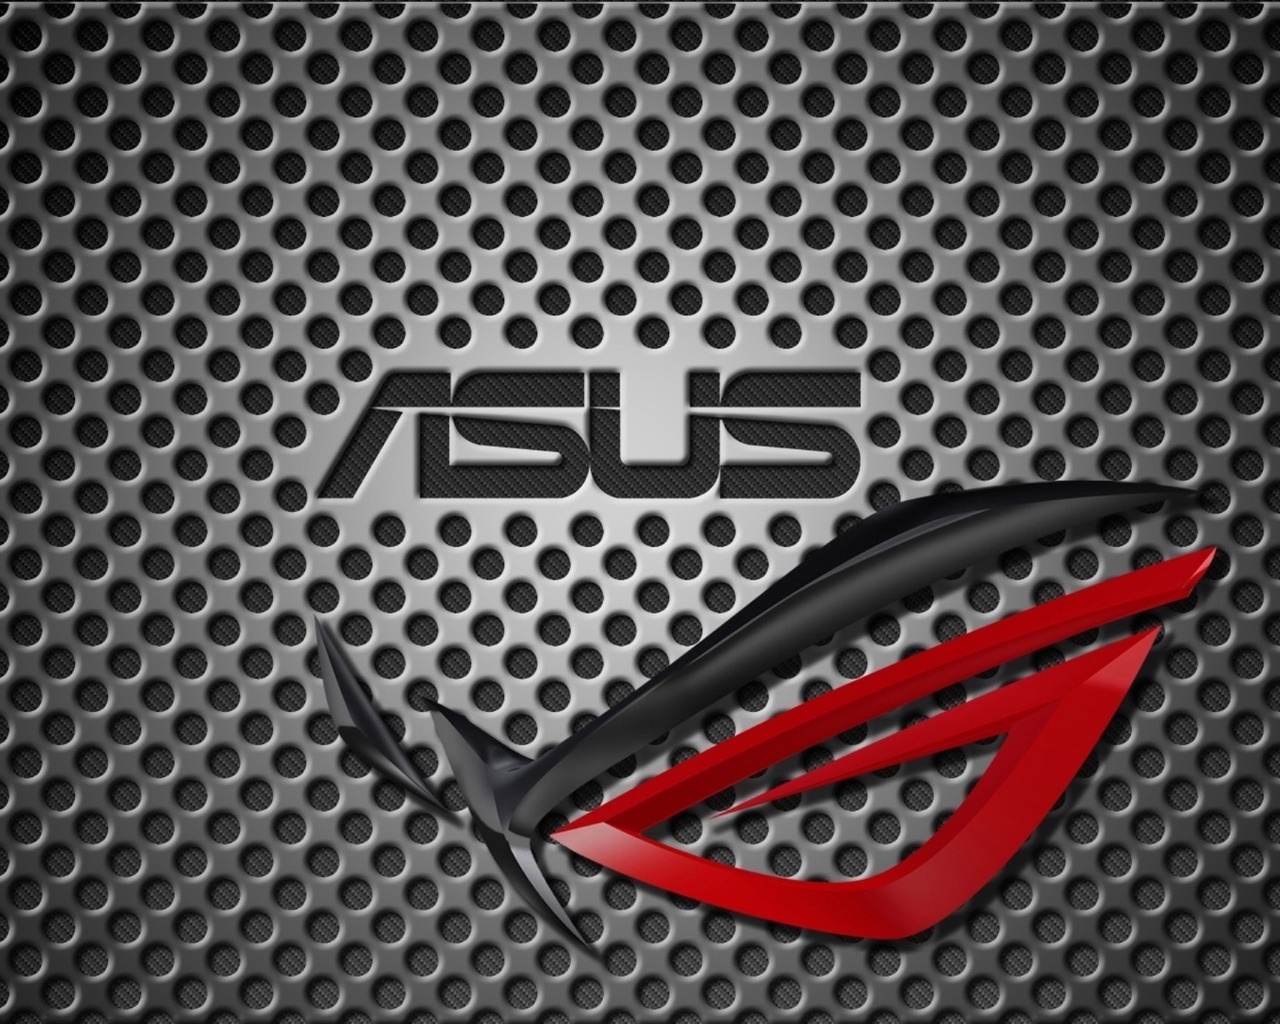 Asus Computer for 1280 x 1024 resolution